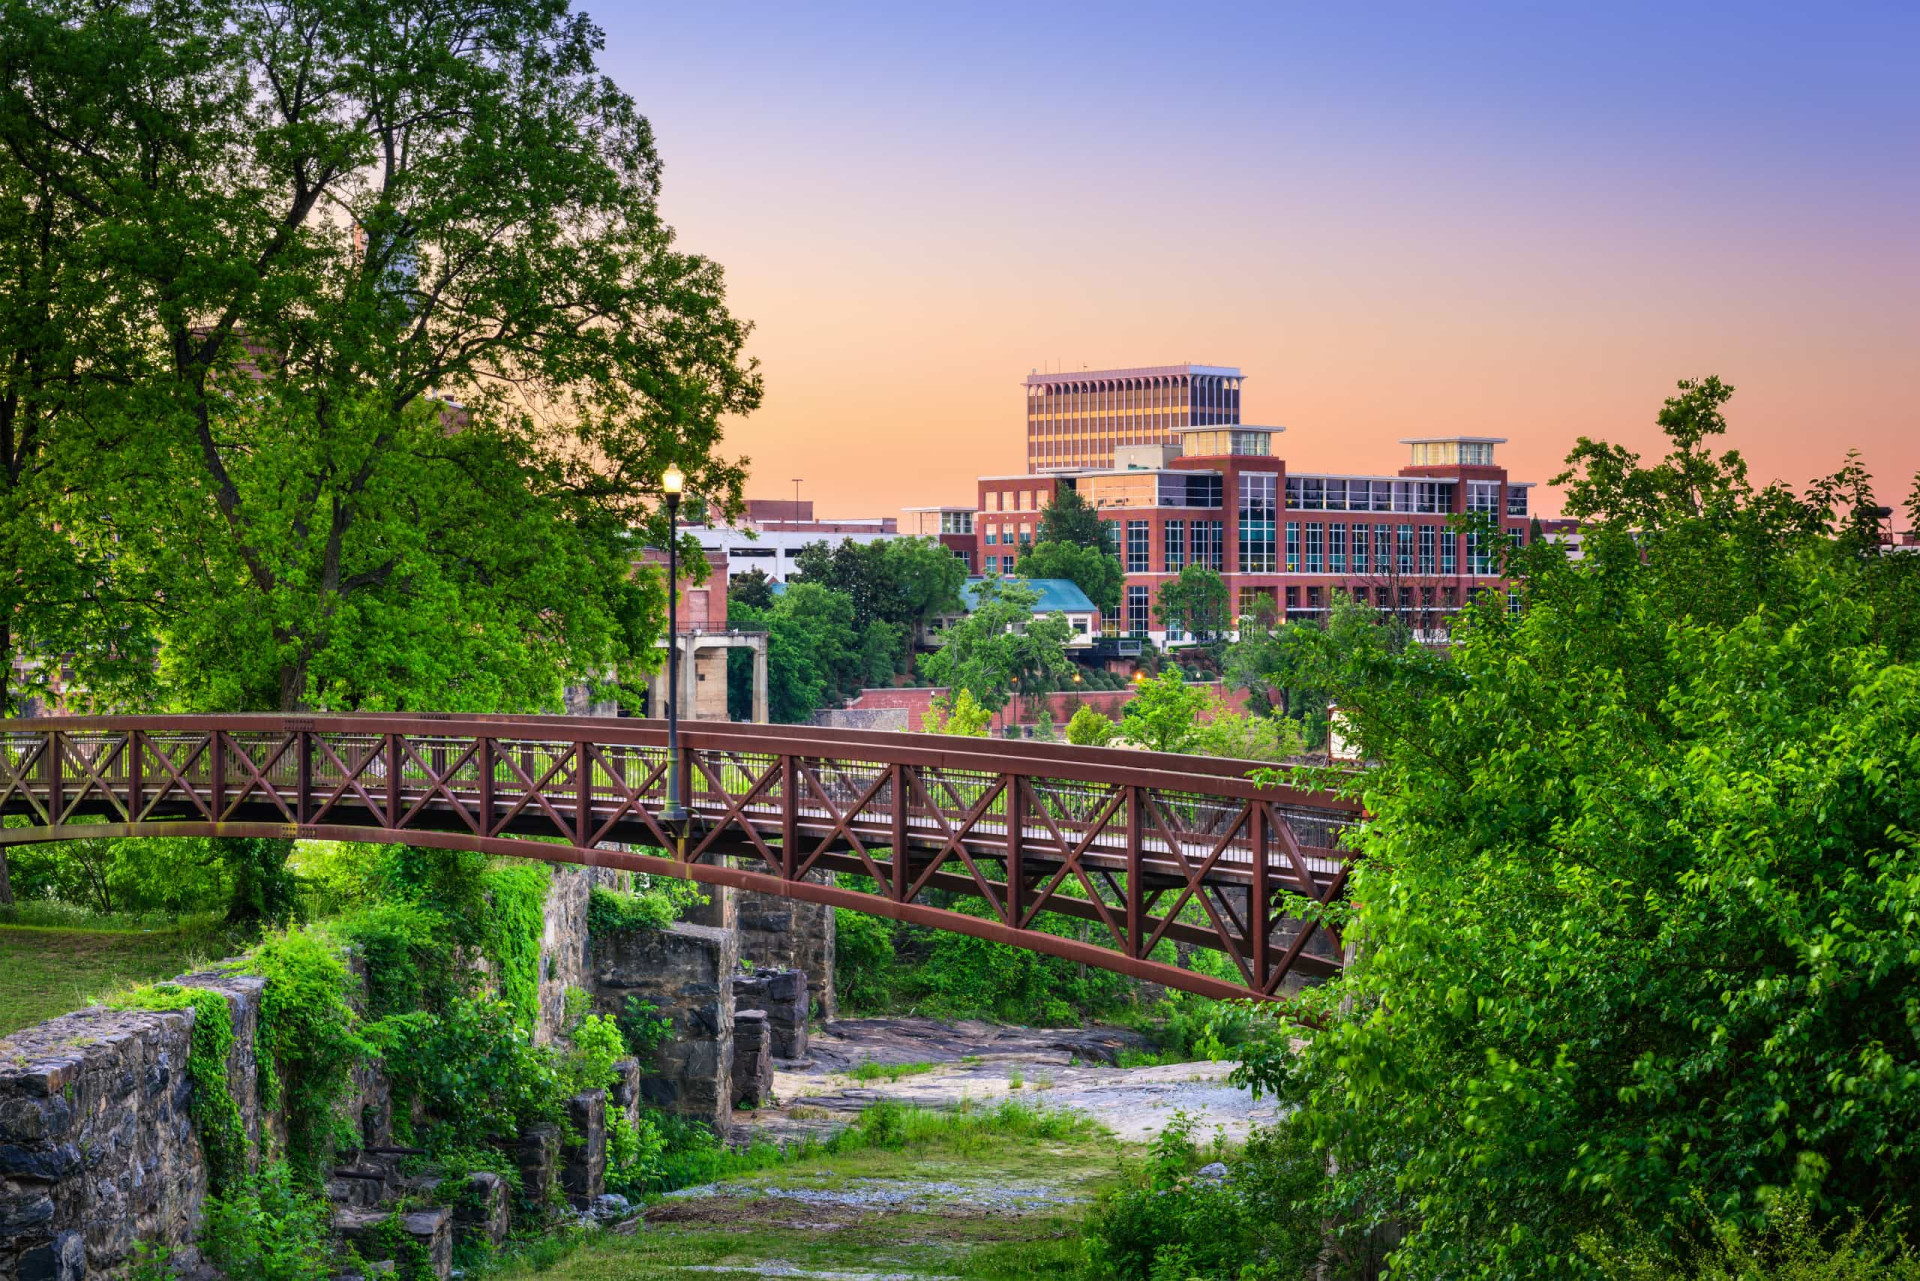 <p>It flies under the radar for many visitors to Georgia, but the city of Columbus is well worth a visit. The drinking and dining scene is famously lively, and adventure fans can enjoy the longest white water rafting course in the world at Whitewater Columbus.</p> <p>Sources: (Explore Georgia) (Attractions of America)</p> <p>See also: <a href="https://www.starsinsider.com/travel/486241/why-does-philadelphia-pack-a-punch">Why does Philadelphia pack a punch?</a></p><p>You may also like:<a href="https://www.starsinsider.com/n/413828?utm_source=msn.com&utm_medium=display&utm_campaign=referral_description&utm_content=487017v3en-us"> Who's the sexiest woman NOT alive?</a></p>